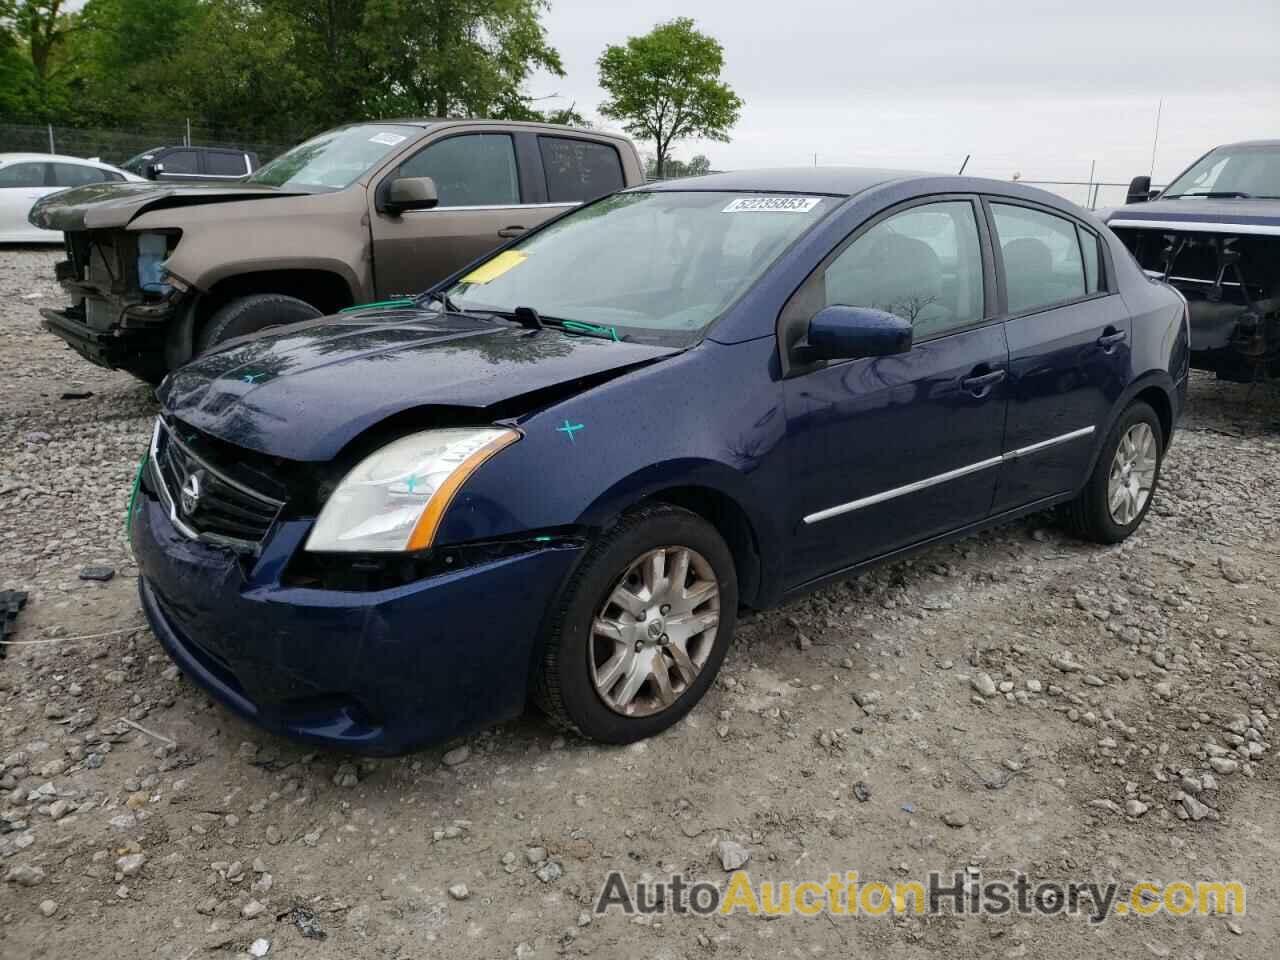 2012 NISSAN SENTRA 2.0, 3N1AB6APXCL713513